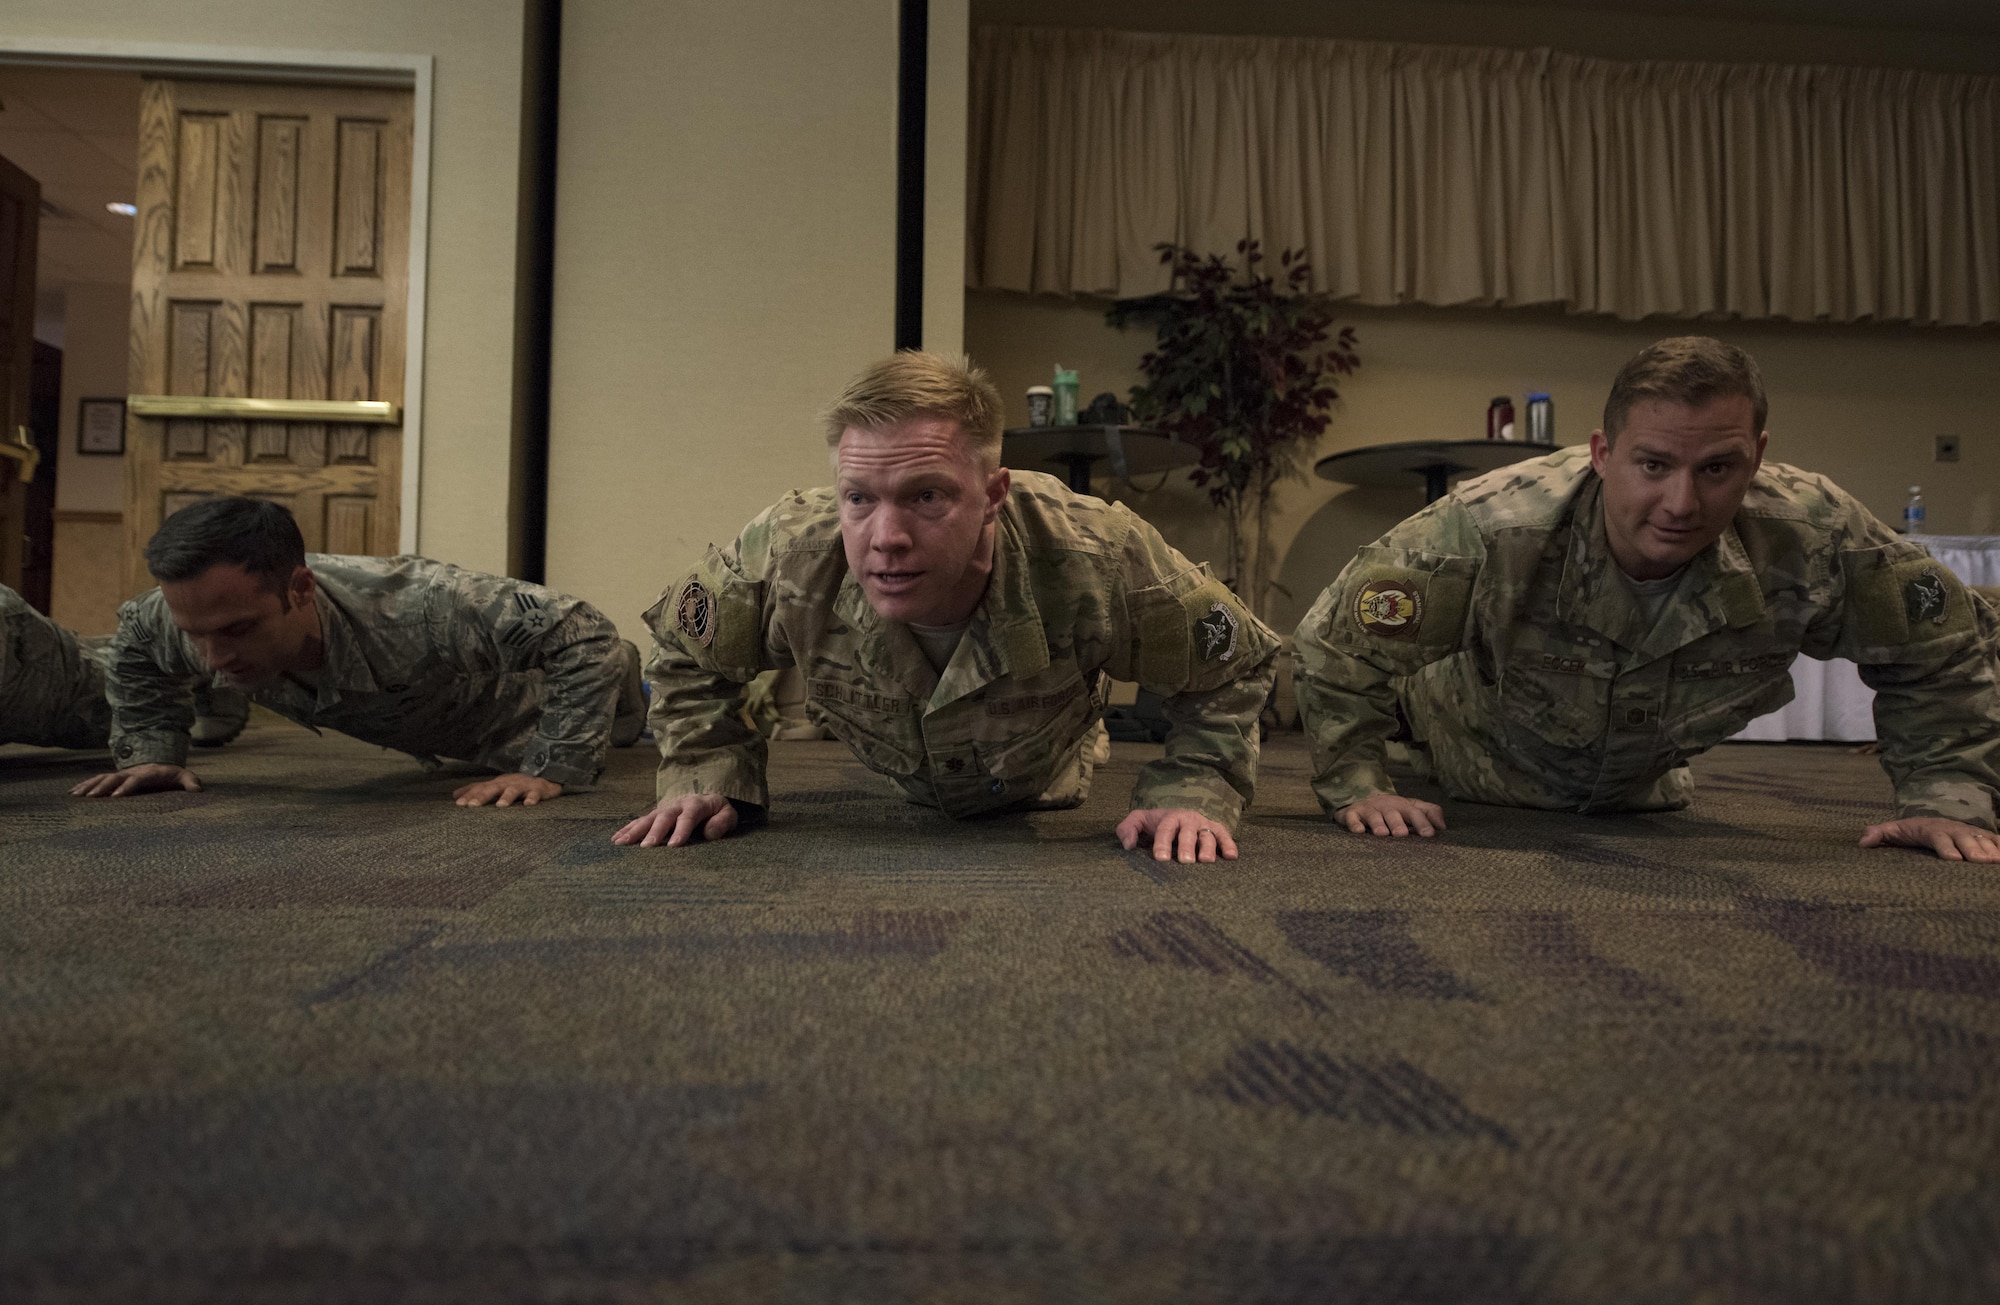 Airmen from the 38th Rescue Squadron perform ceremonial push-ups, March 3, 2017, at Moody Air Force Base, Ga. The push-ups were done in memory of Senior Airman Jason Cunningham and to honor retired Tech. Sgt. Keary Miller, for his brave actions during the battle of Roberts Ridge. (U.S. Air Force photo by Airman 1st Class Lauren M. Sprunk)